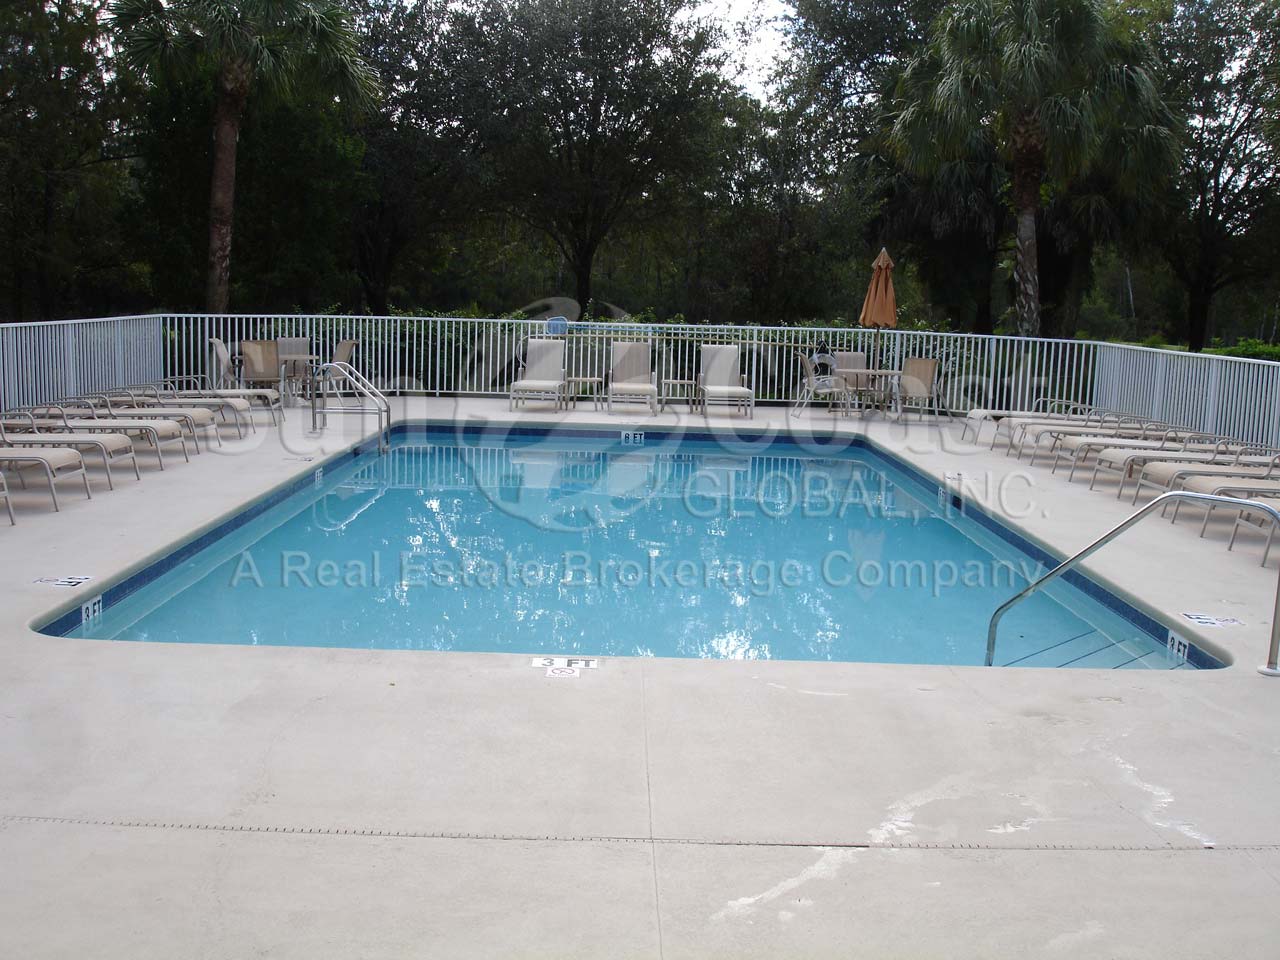 Southern Links community pool